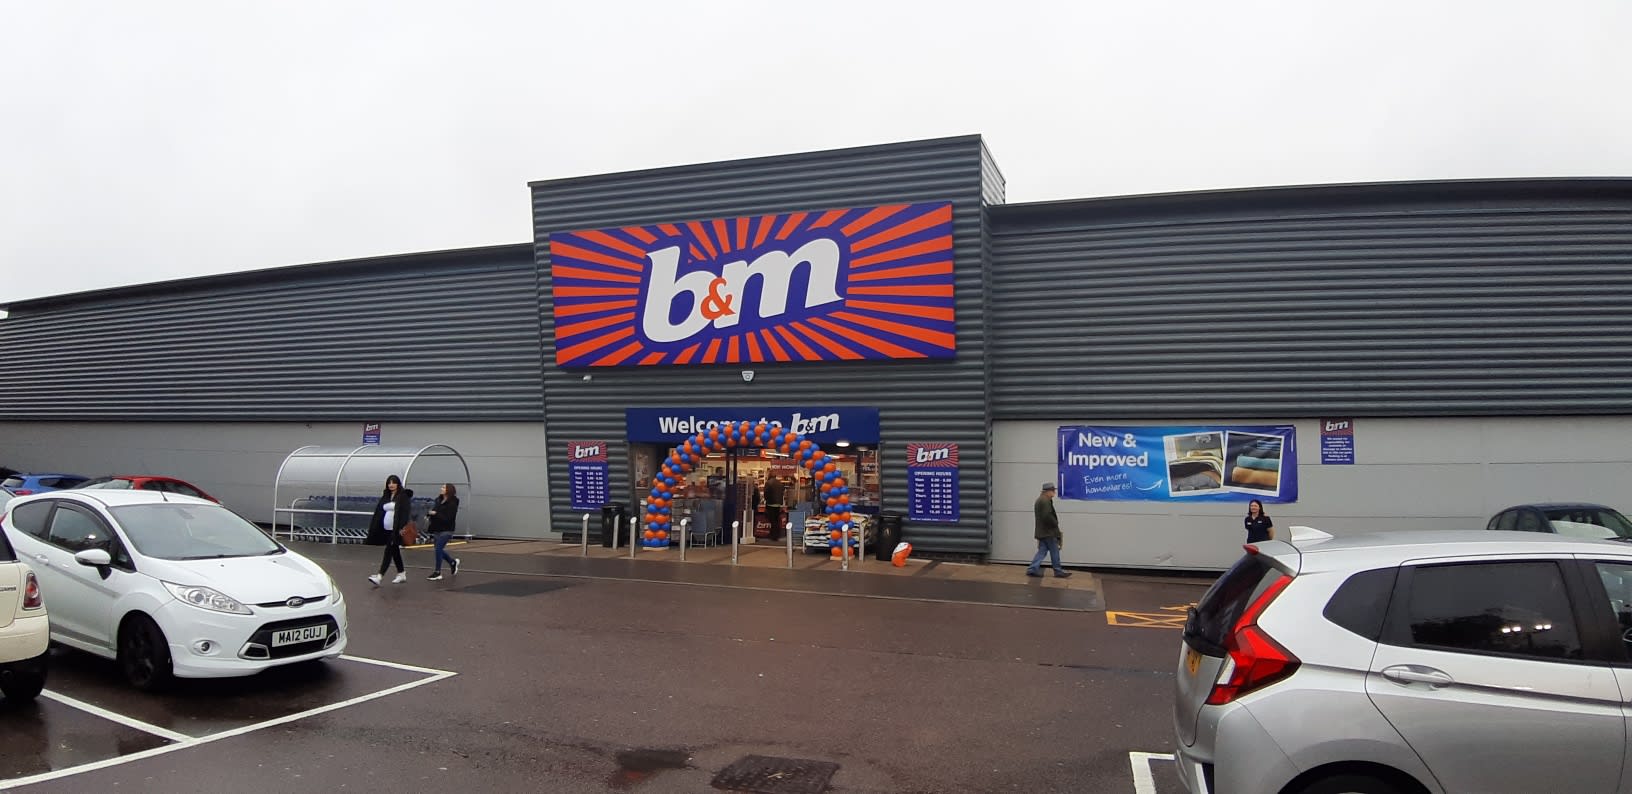 After extensive refurbishments works, B&M Derby re-opened its doors on Friday (1st November 2019). The B&M Home Store is located on Ascot Drive, near to the town centre.